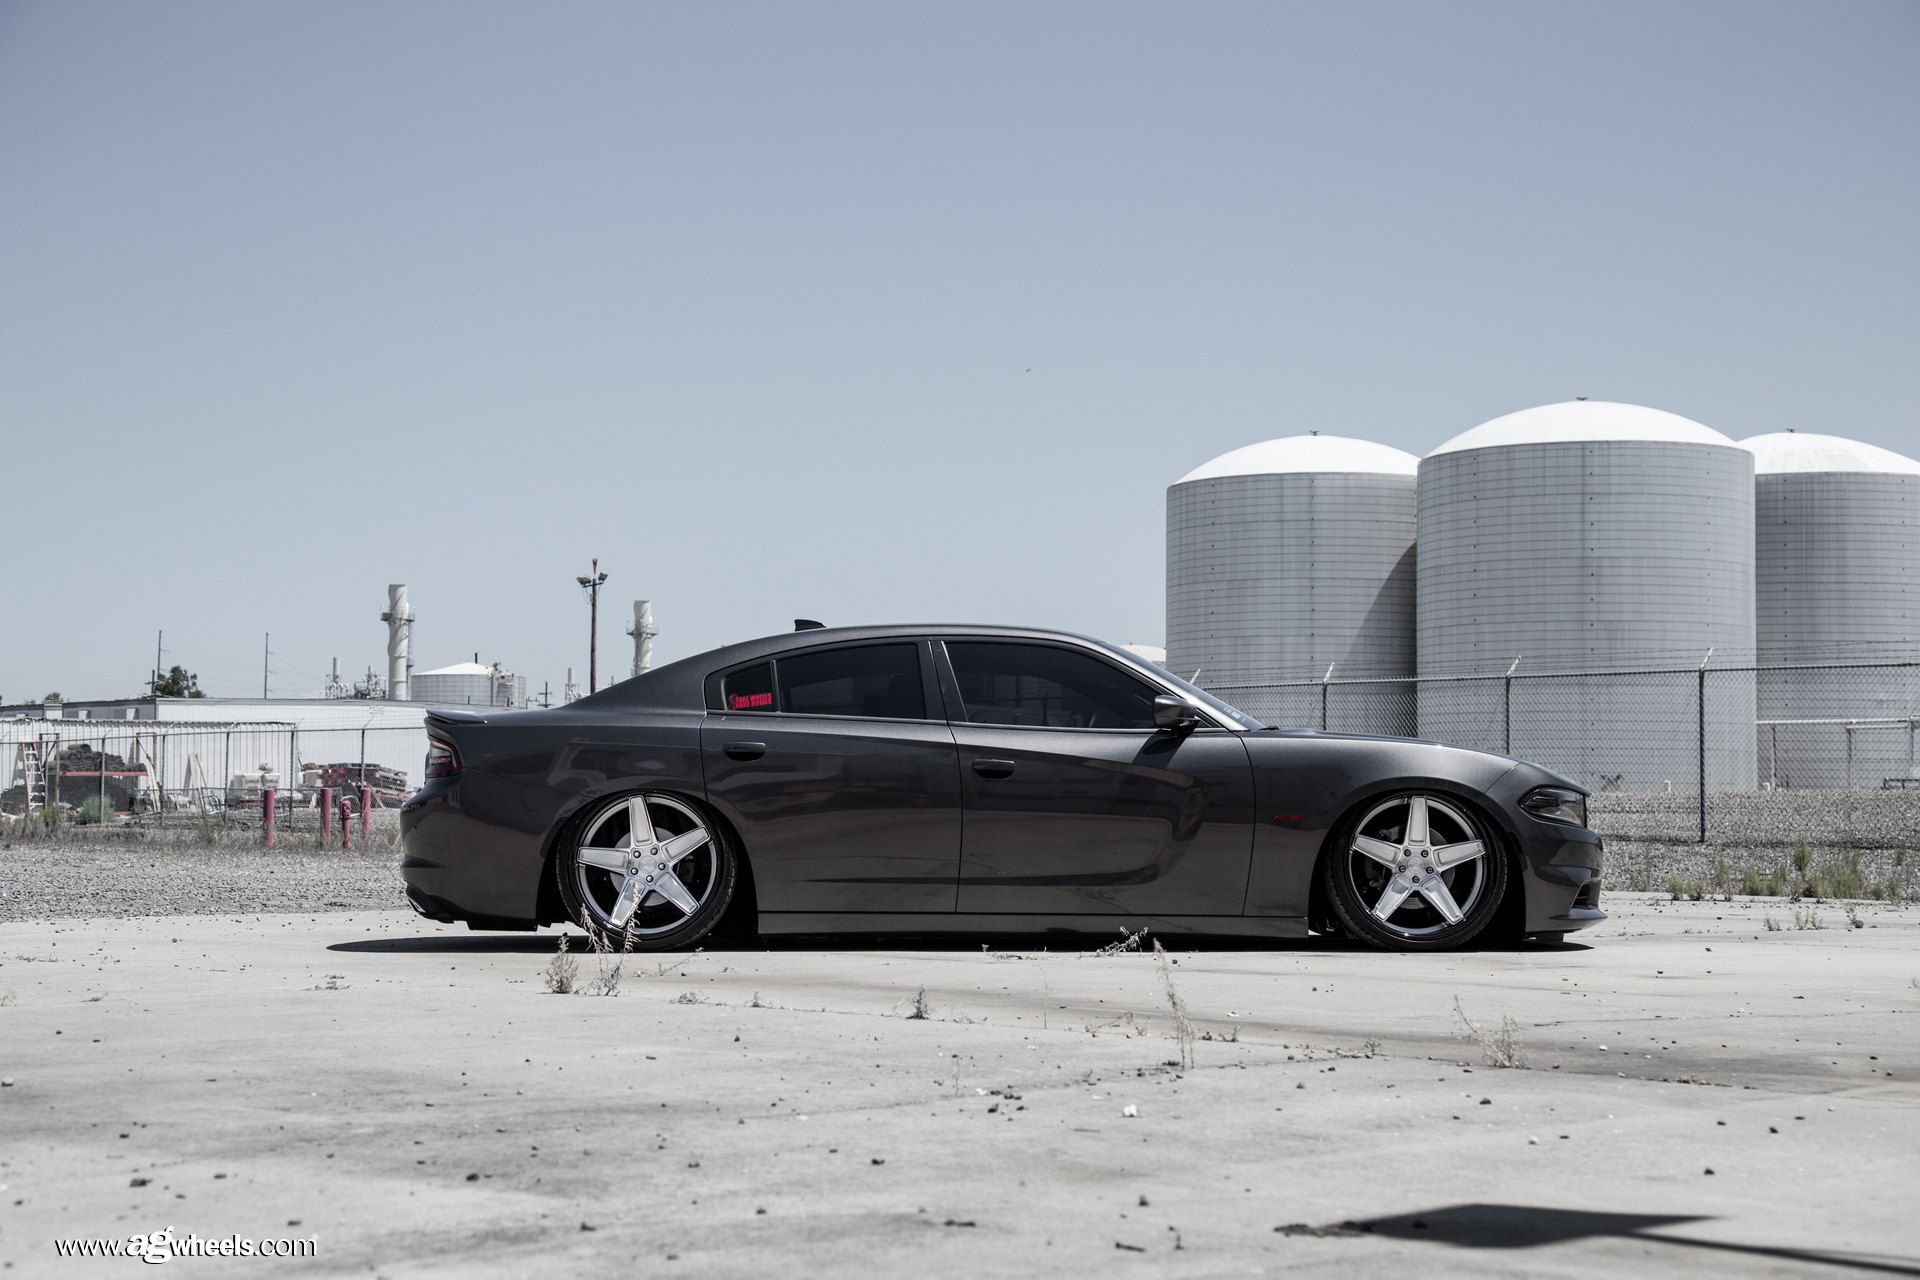 Aftermarket Side Scoops on Gray Dodge Charger Hemi - Photo by Avant Garde Wheels